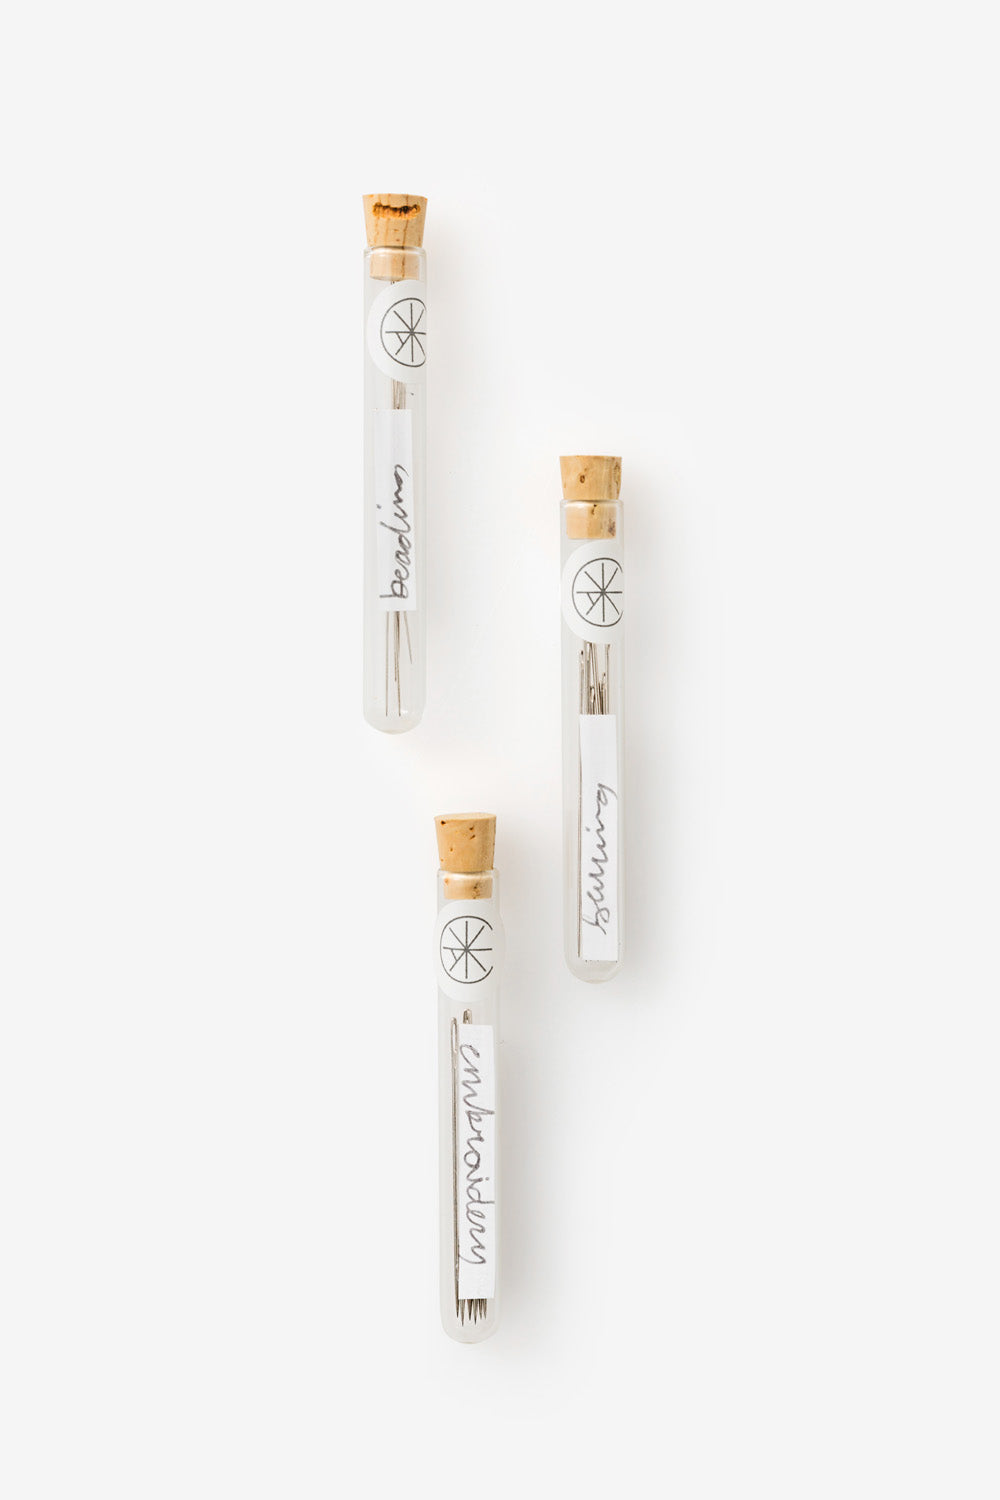 Three glass vials of needles: one each for beading, sewing, and embroidery.